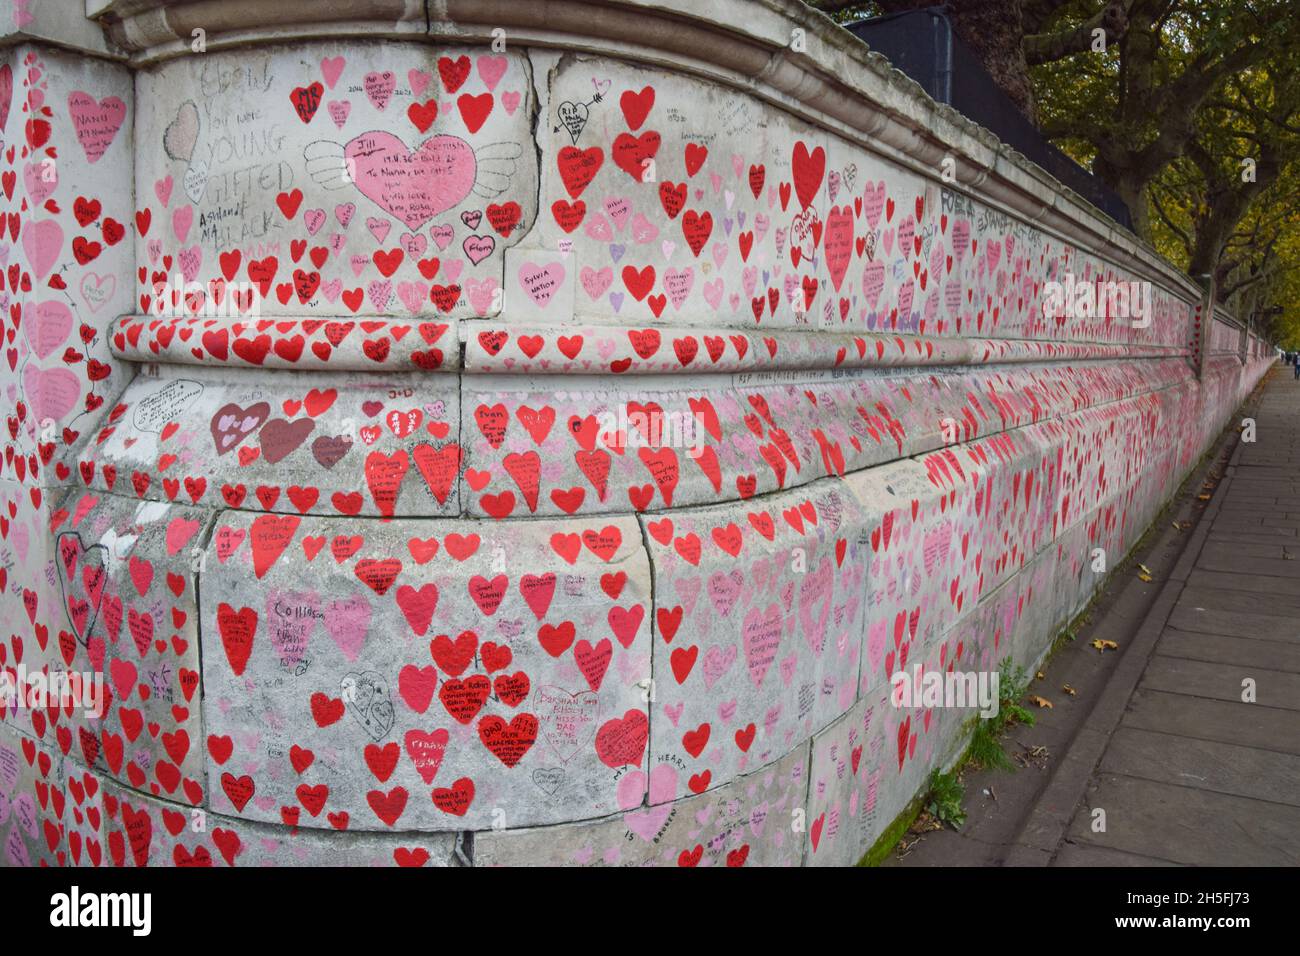 London, UK. 9th November 2021. The National Covid Memorial Wall outside St Thomas' Hospital. Over 150,000 red hearts have been painted by volunteers and members of the public, one for each life lost to Covid in the UK to date. Stock Photo